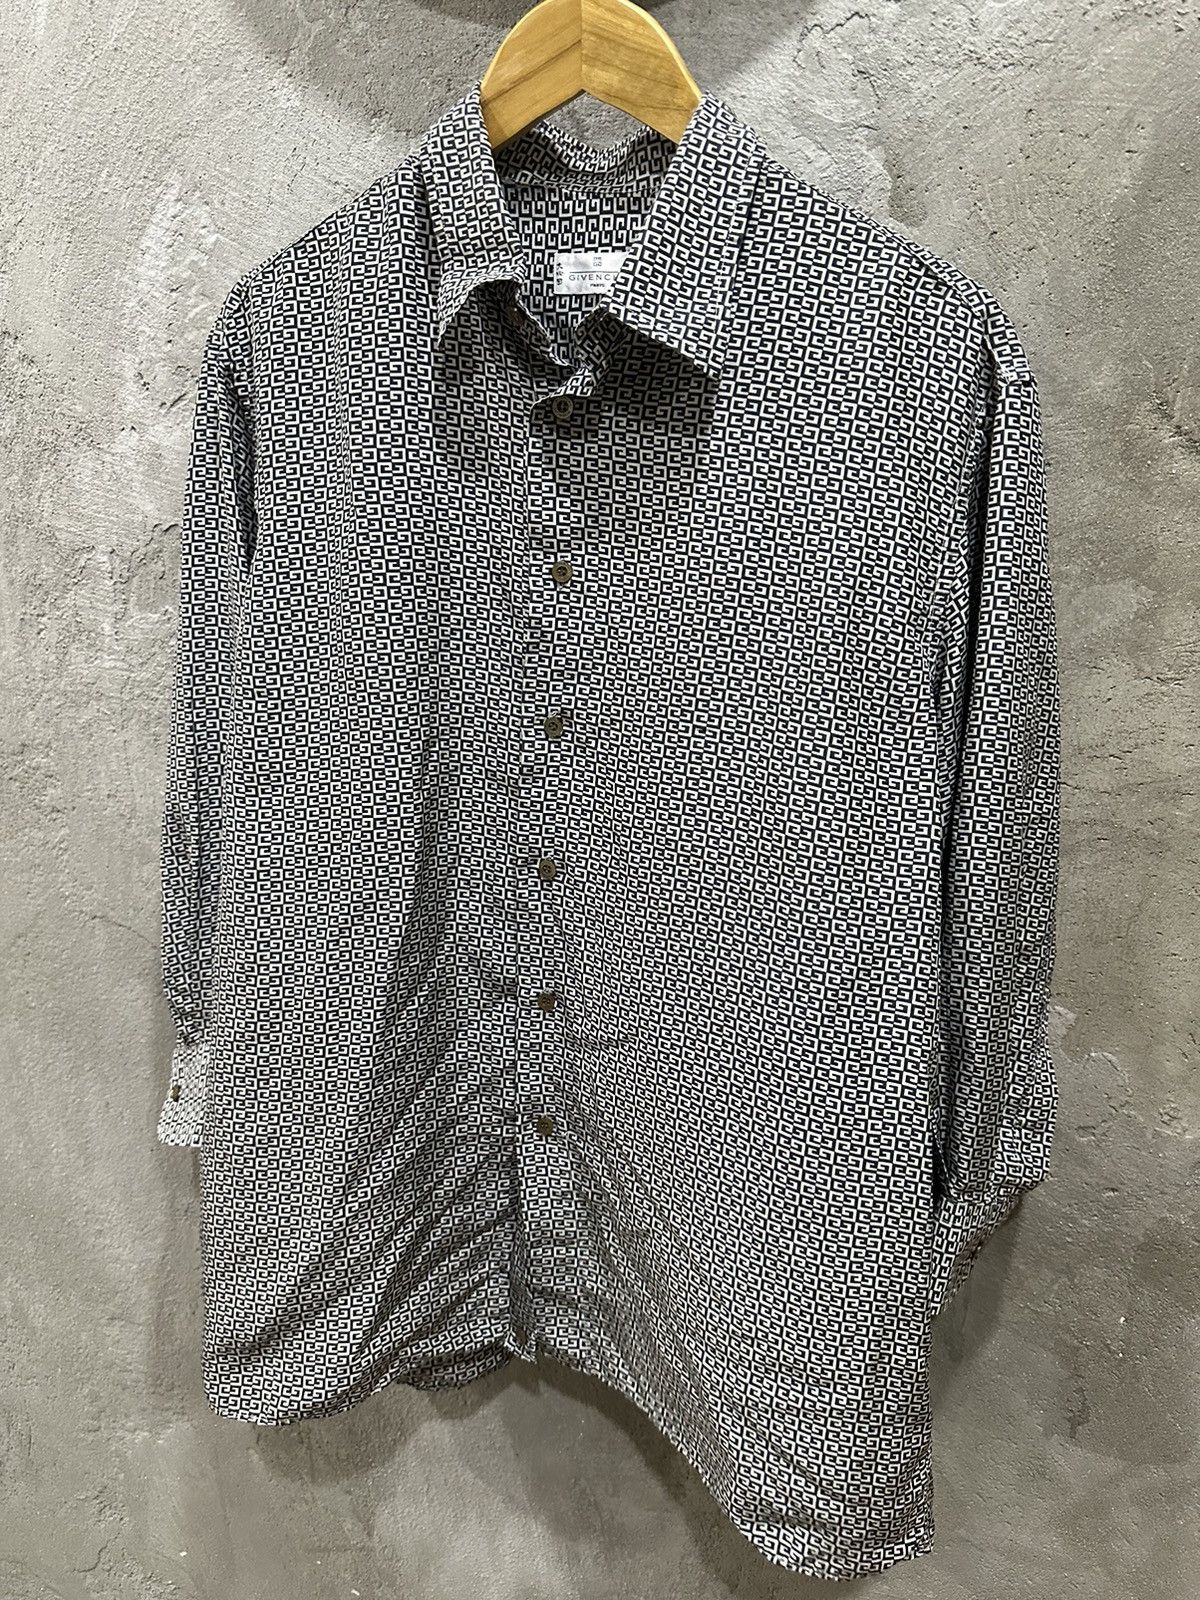 Givenchy Made in Italy Monogram Silk Button Shirt - 6